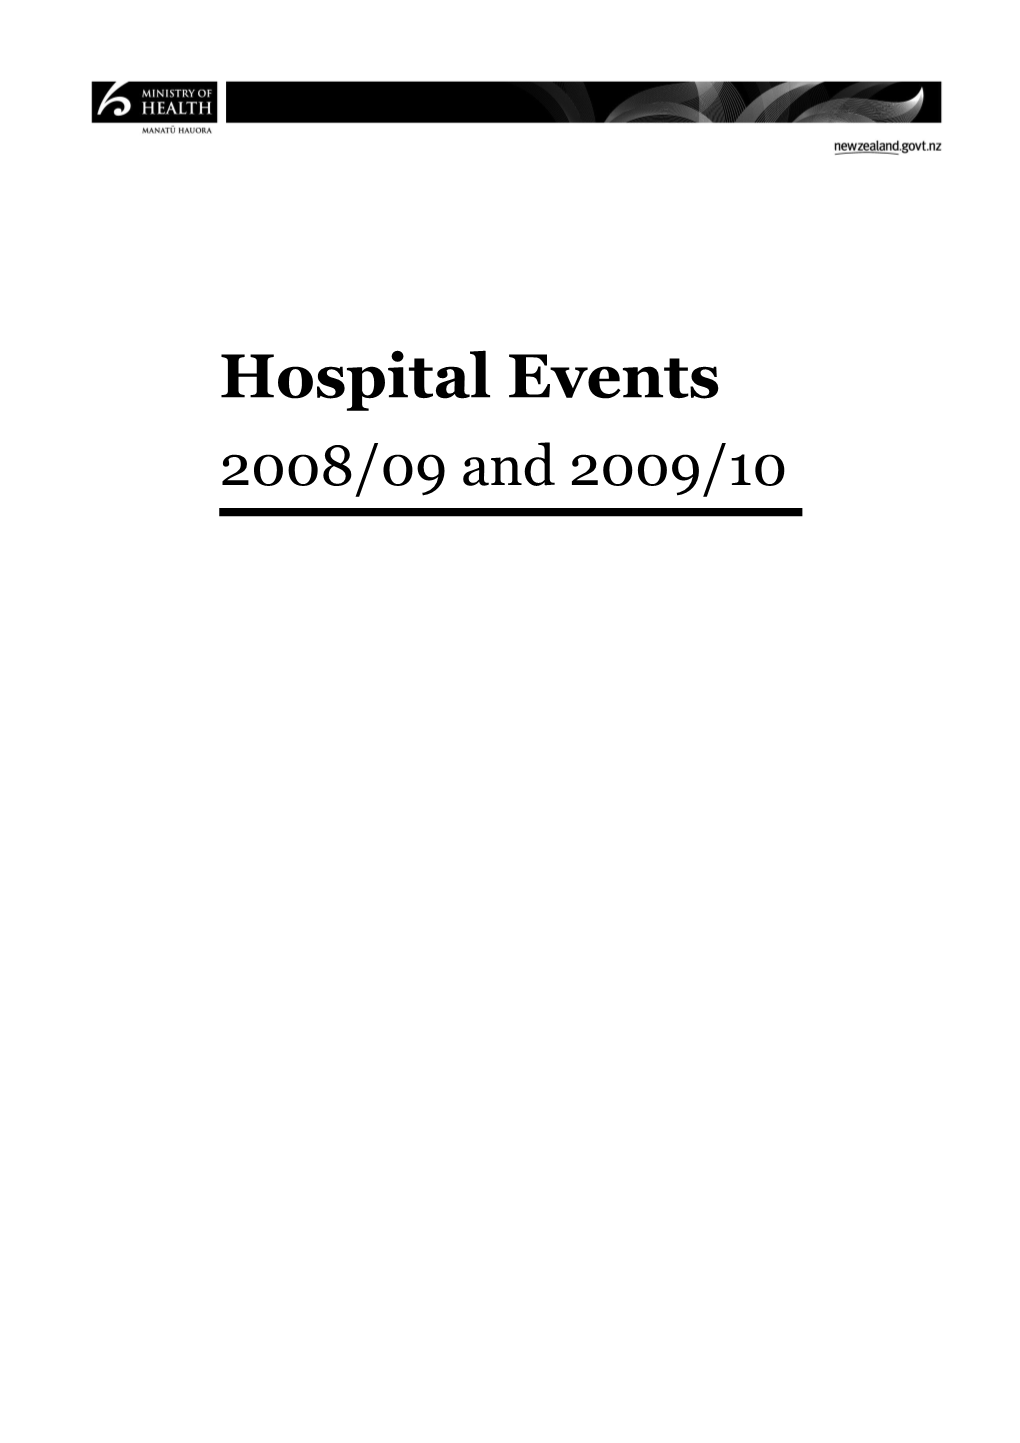 Citation: Ministry of Health. 2012. Hospital Events 2008/09 and 2009/10. Wellington:Ministry